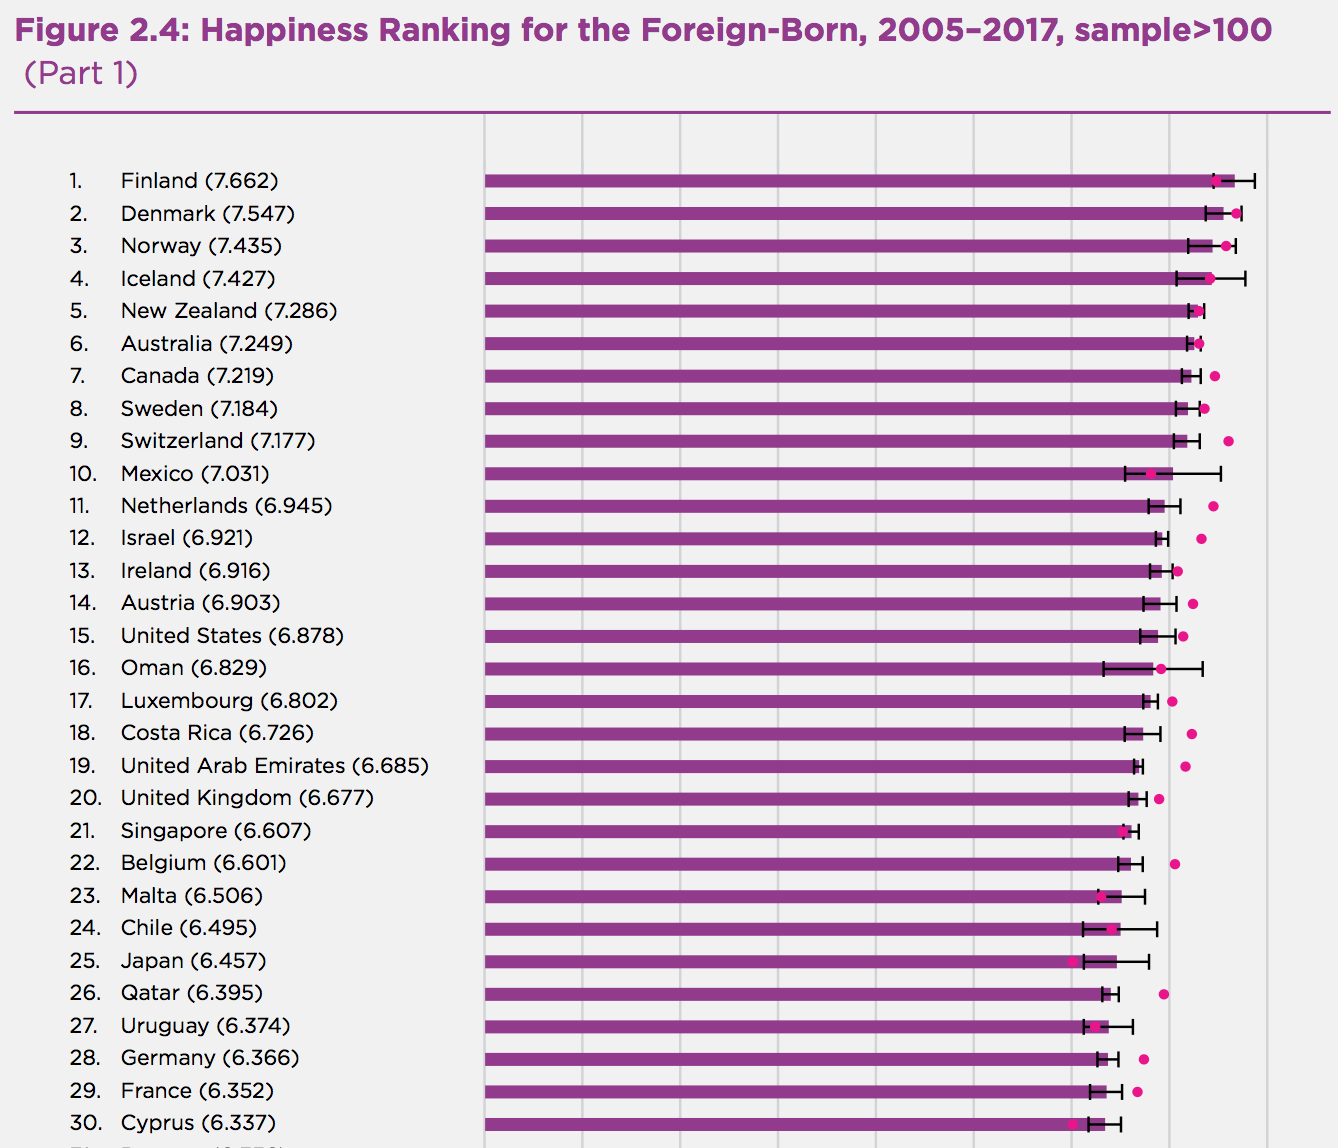 Immigration and Happiness